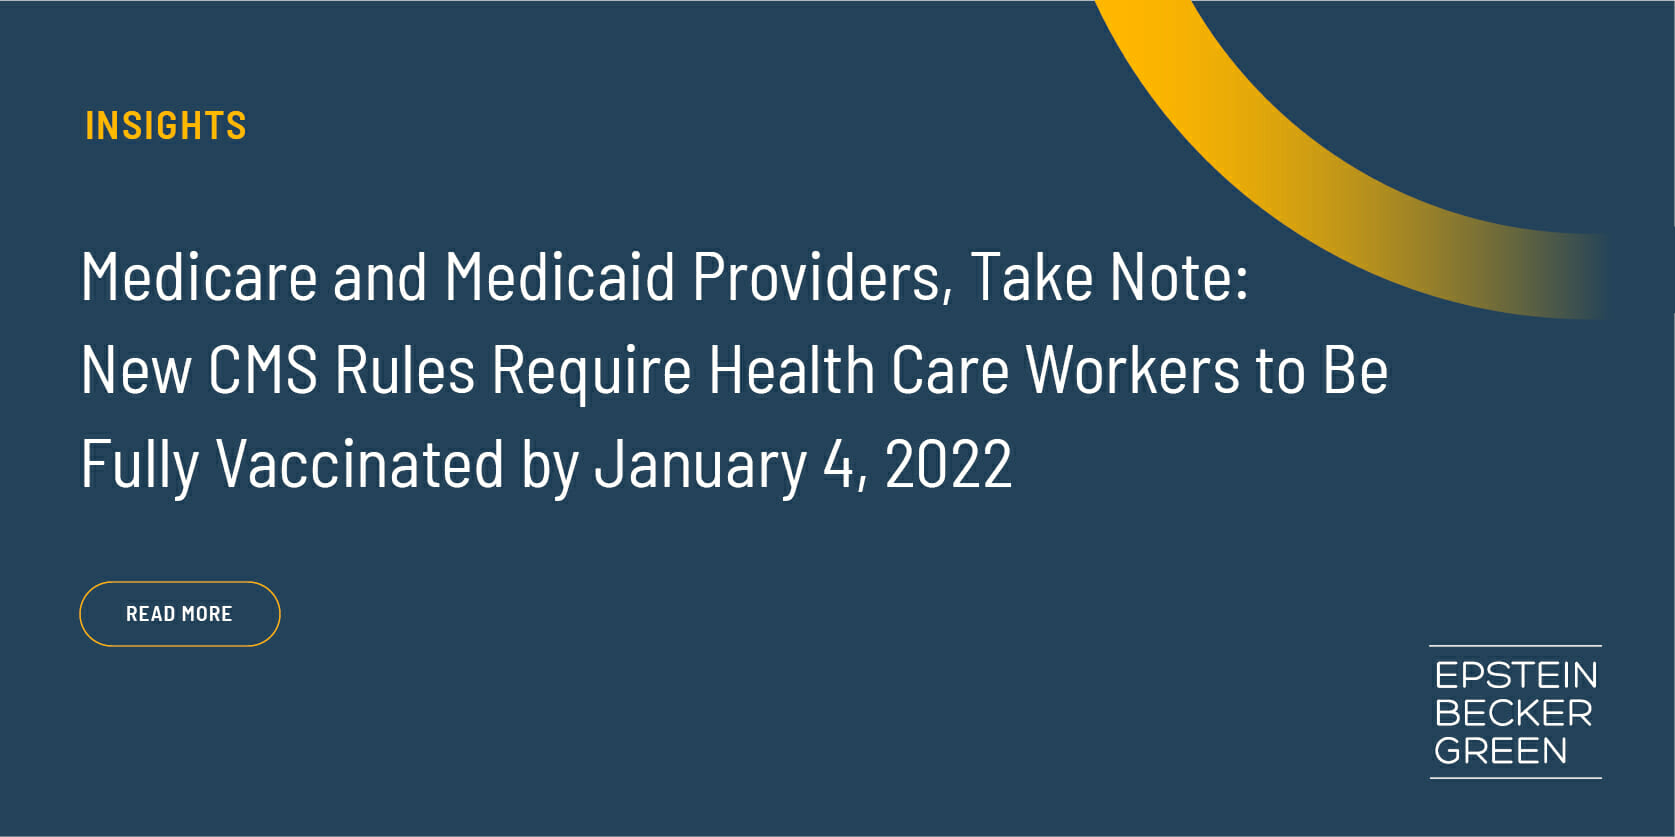 Medicare and Medicaid Providers, Take Note New CMS Rules Require